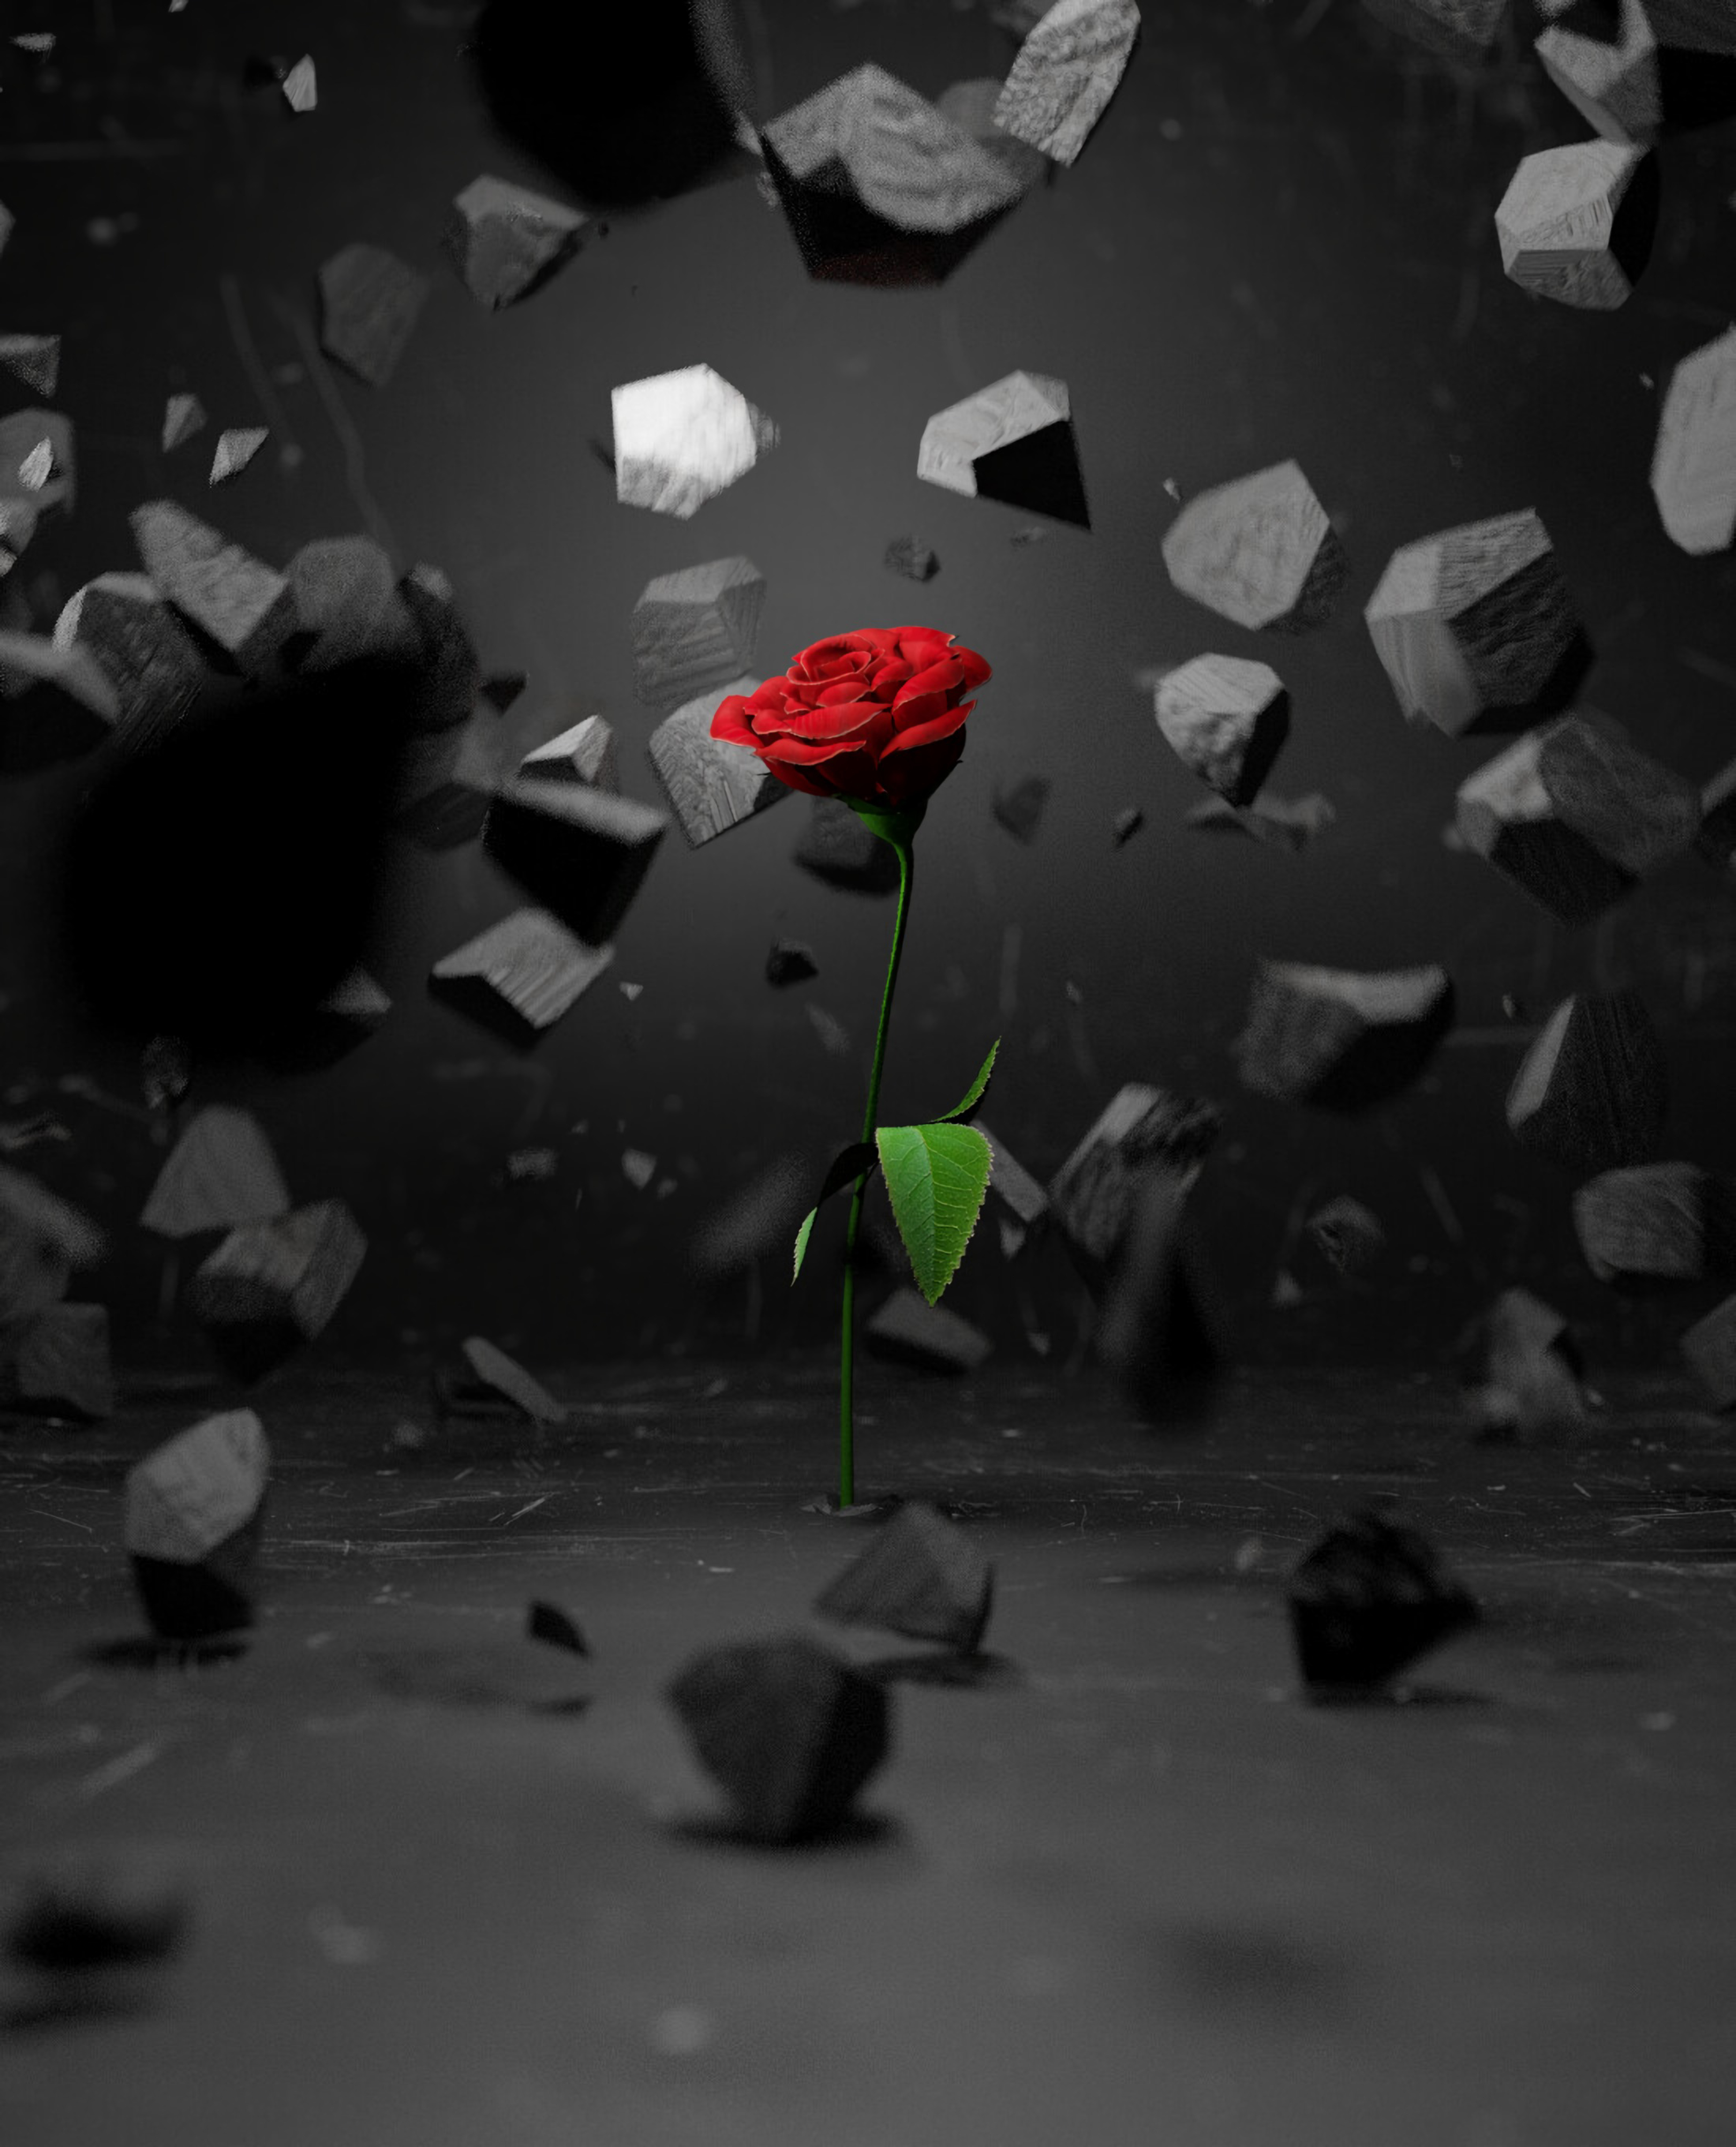 Free HD 3d, stones, rose, rose flower, flower, smithereens, red, shards